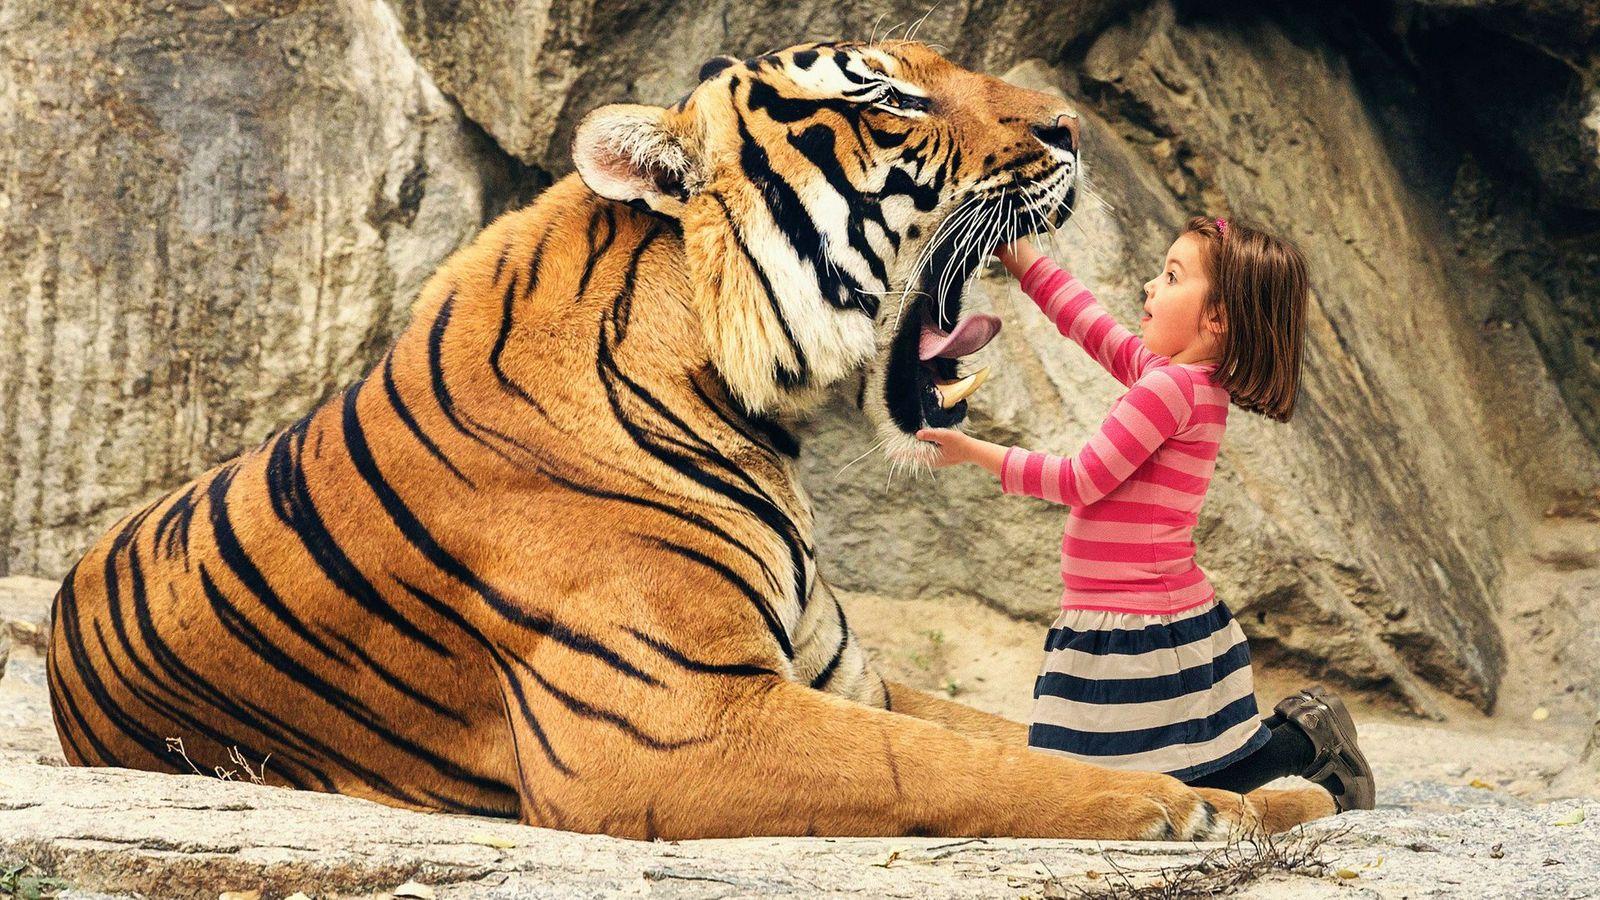 Girl Looking Inside Tiger Mouth Wallpaper